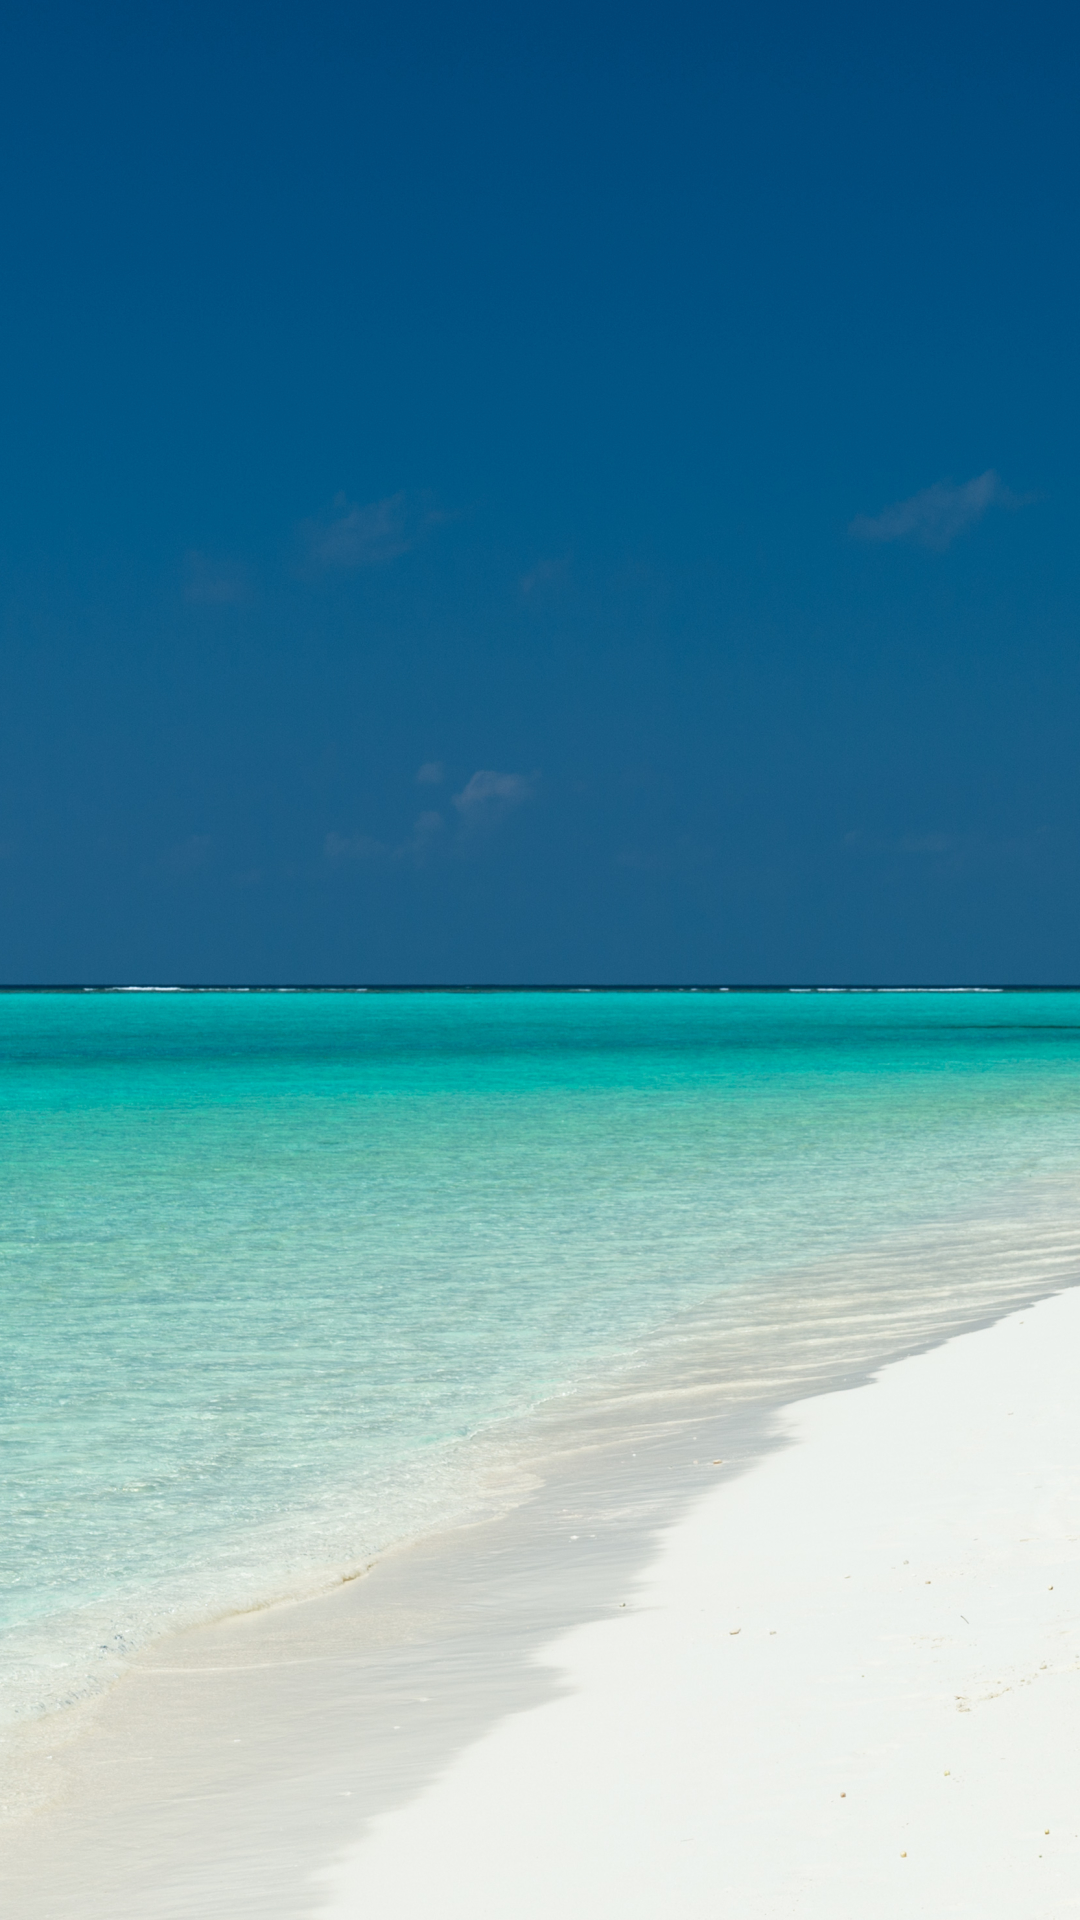 Turquoise Waters of the Maldives by Alessandro Caproni